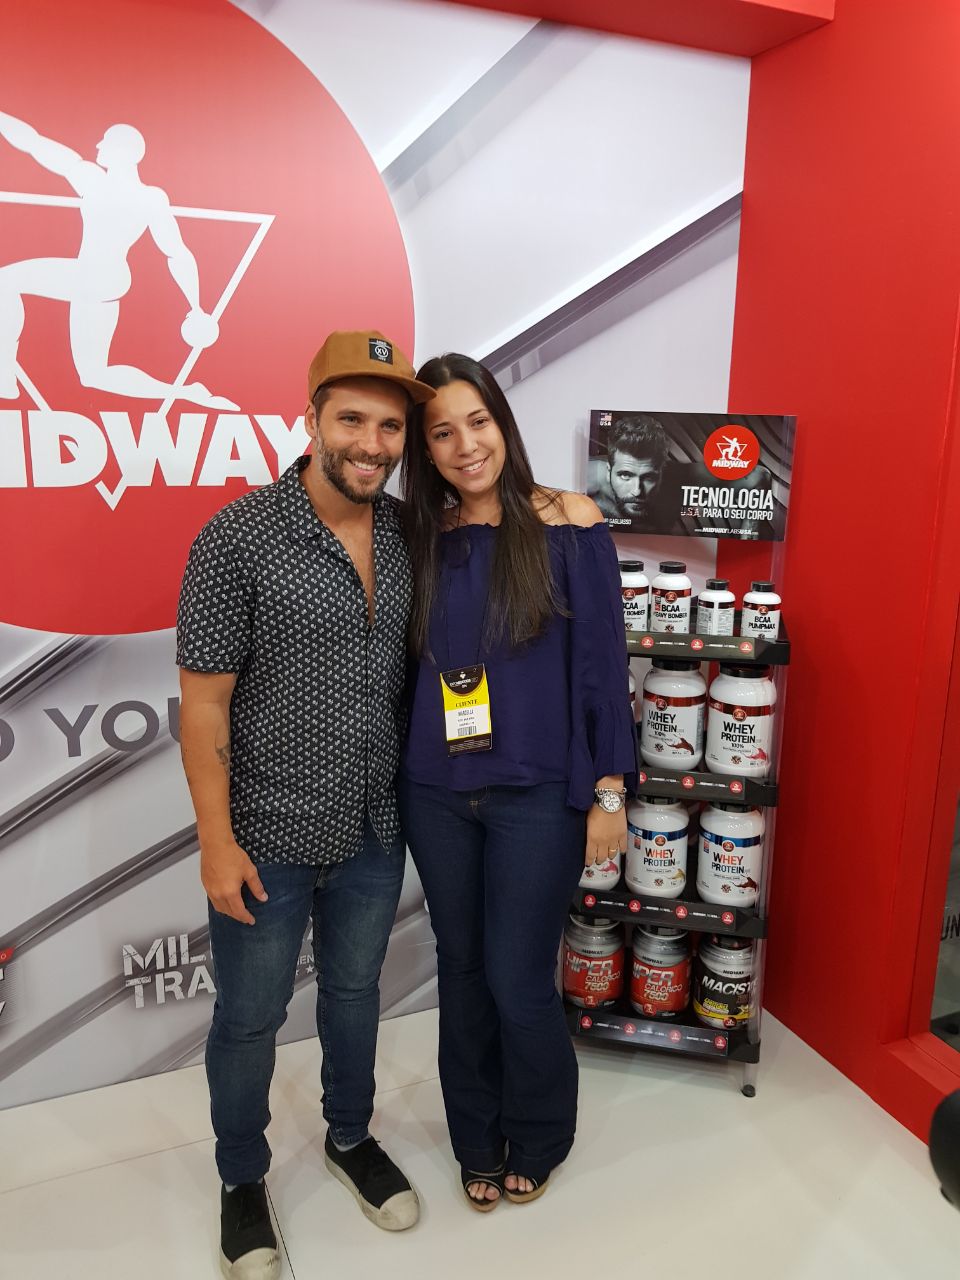 Expo Negócios - D4 Trade Show (Midway Labs Trade Show Booth with actor Bruno Gagliasso)